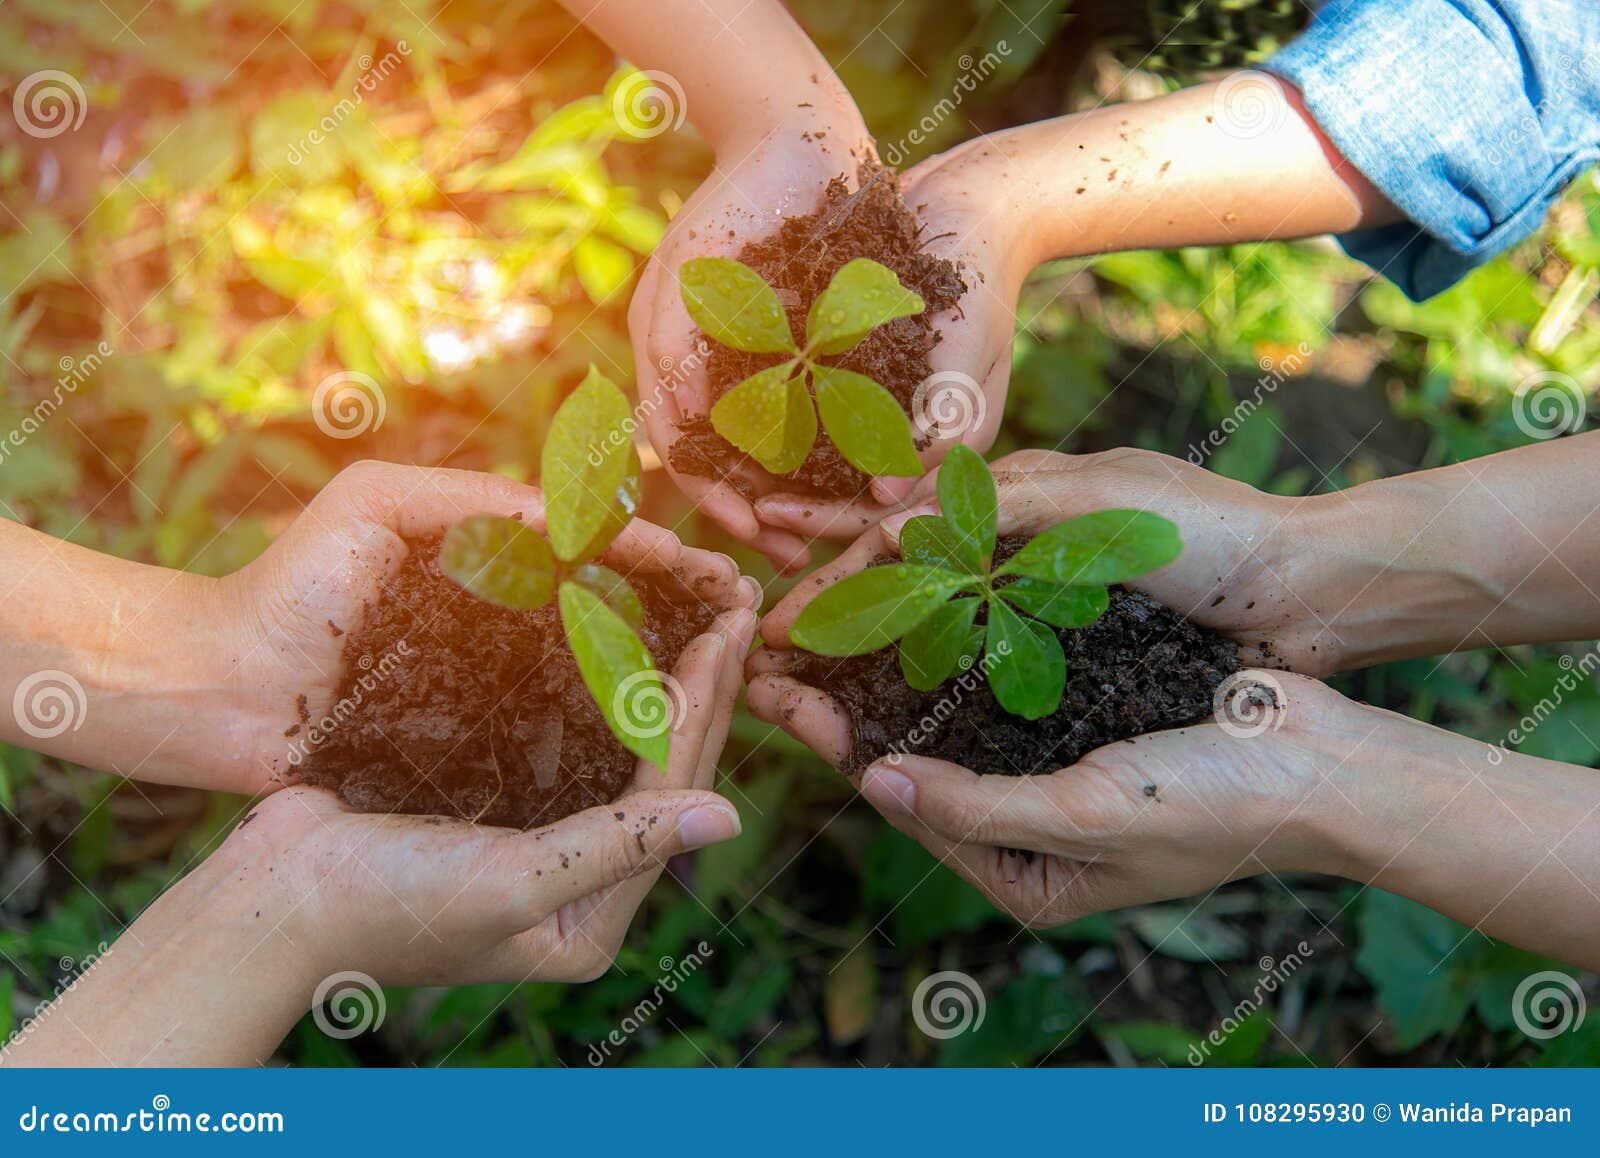 hands people team work family cupping young plant nurture environmental and reduce global warming earth.